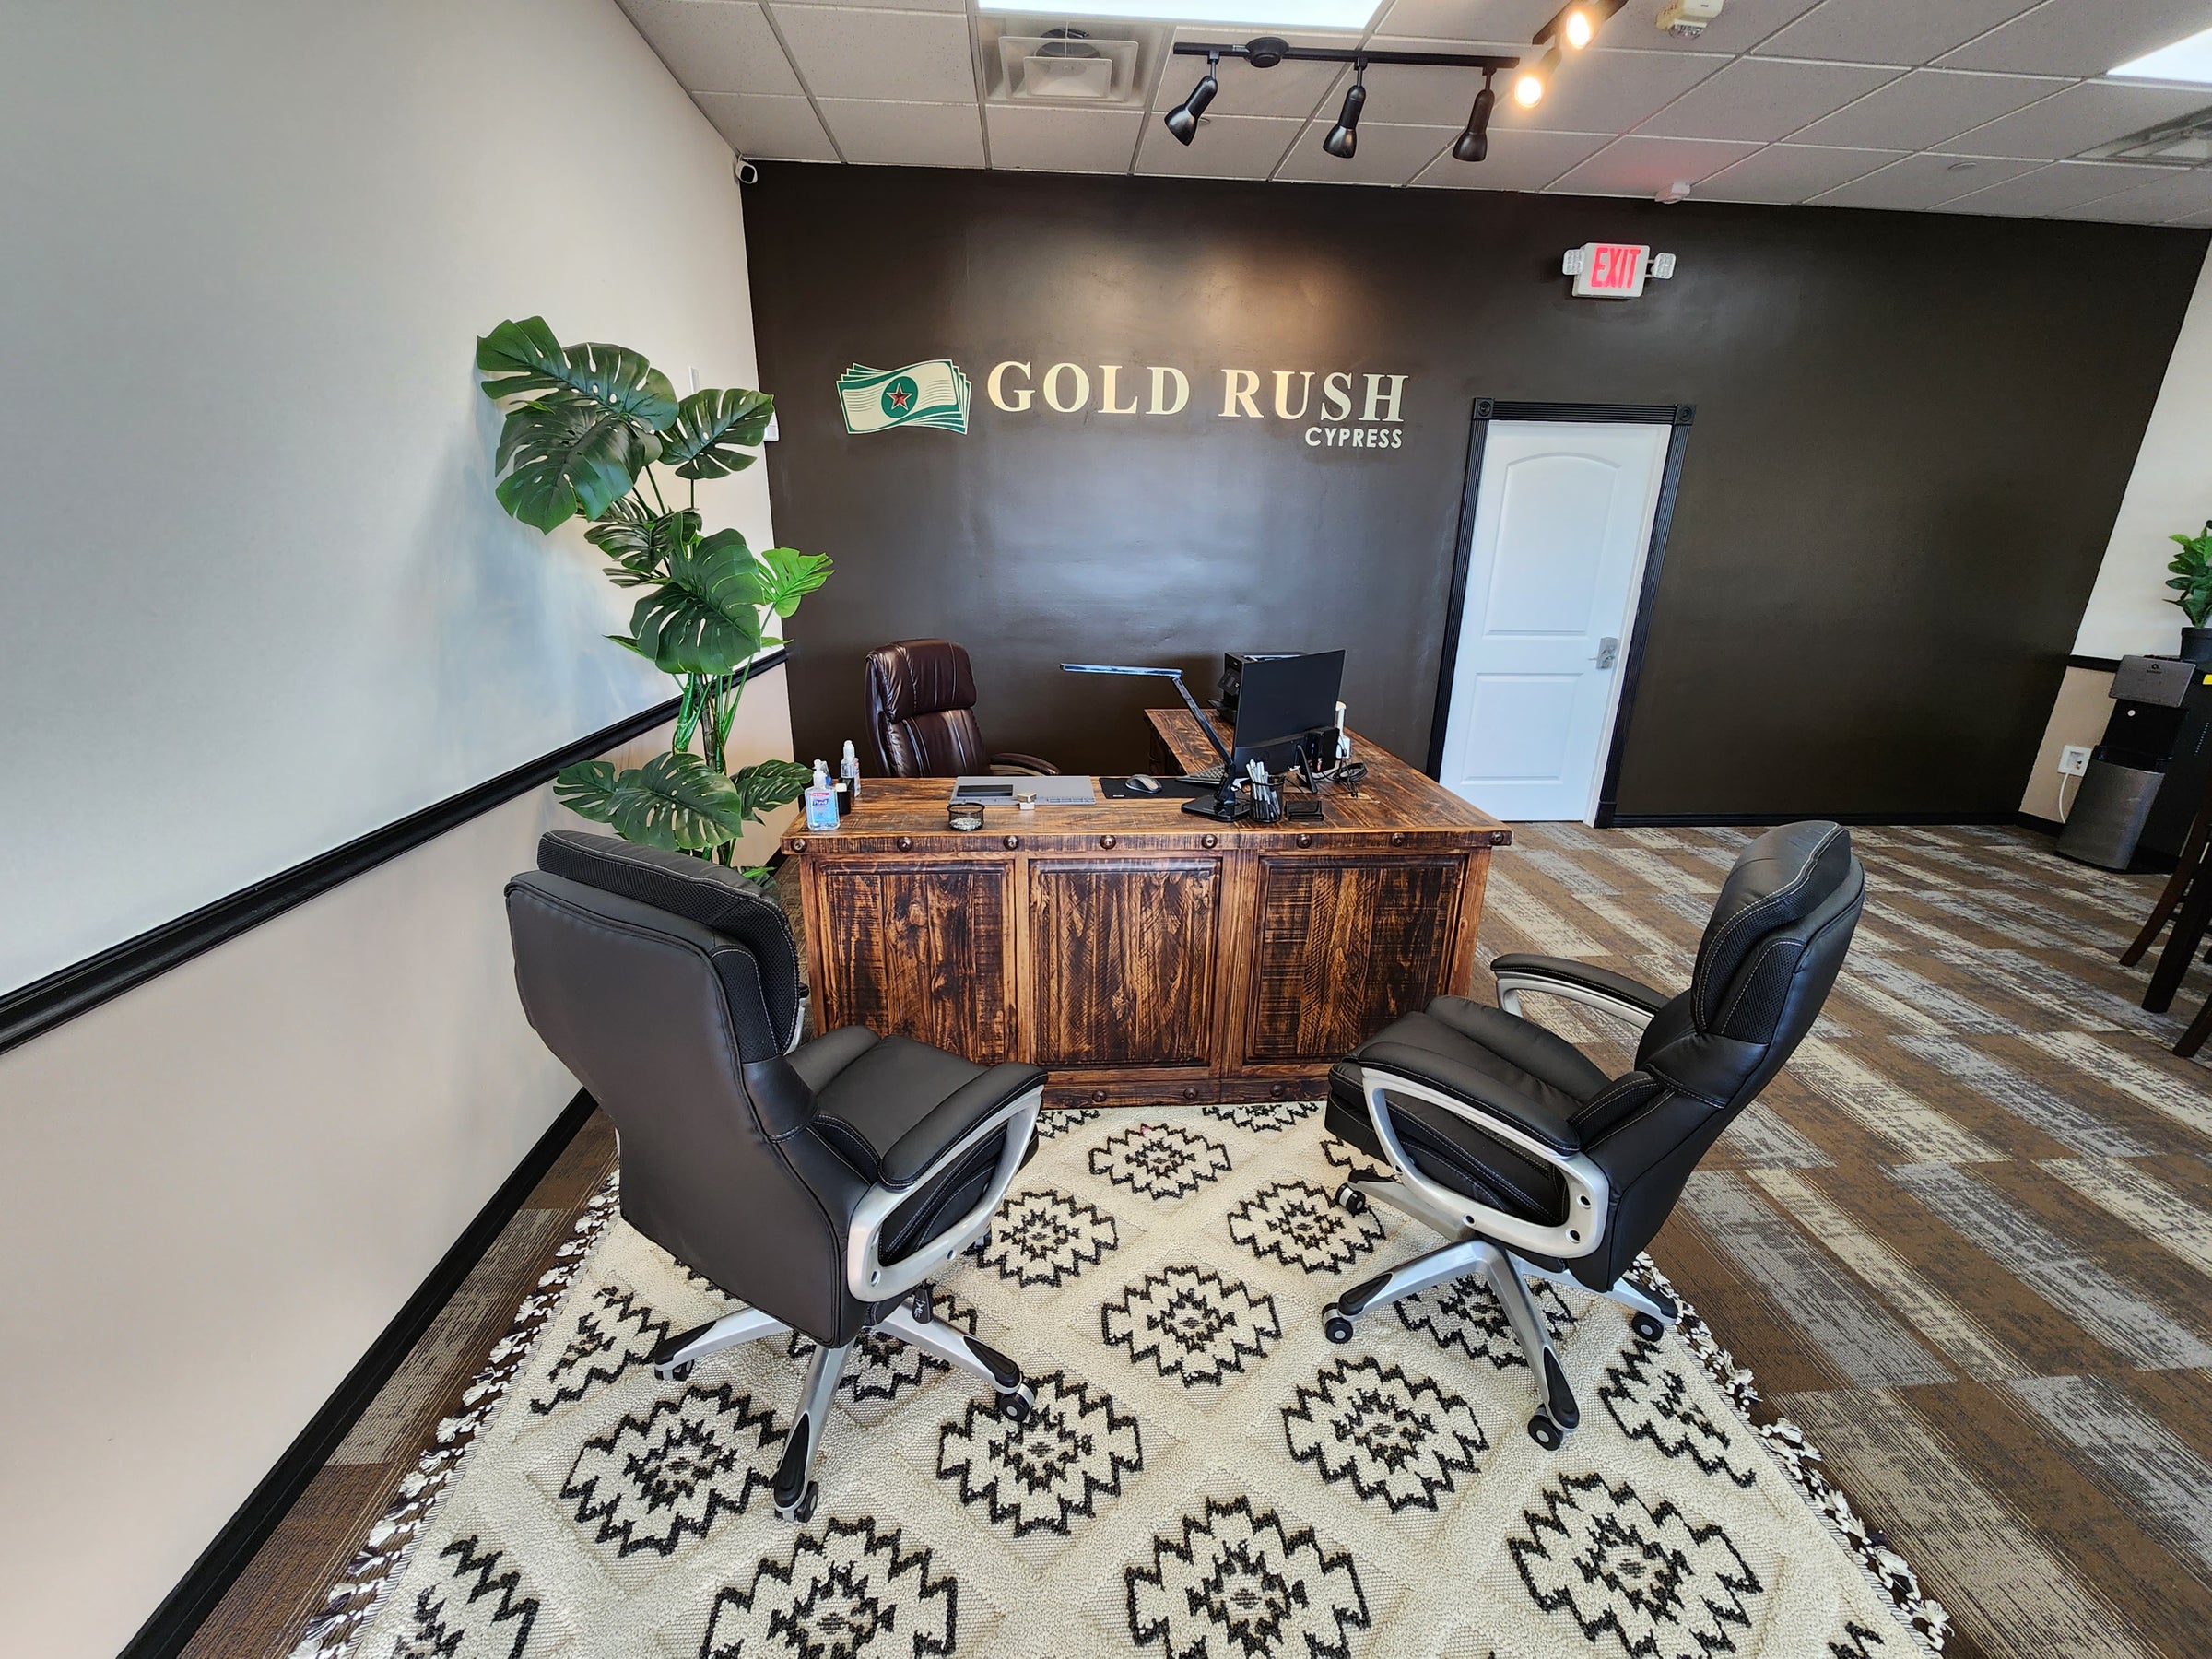 Gold Rush Houston office interior with chairs and desk, and the Gold Rush sign on the wall. Represents a relaxed and easy process of selling gold at Gold Rush Houston.